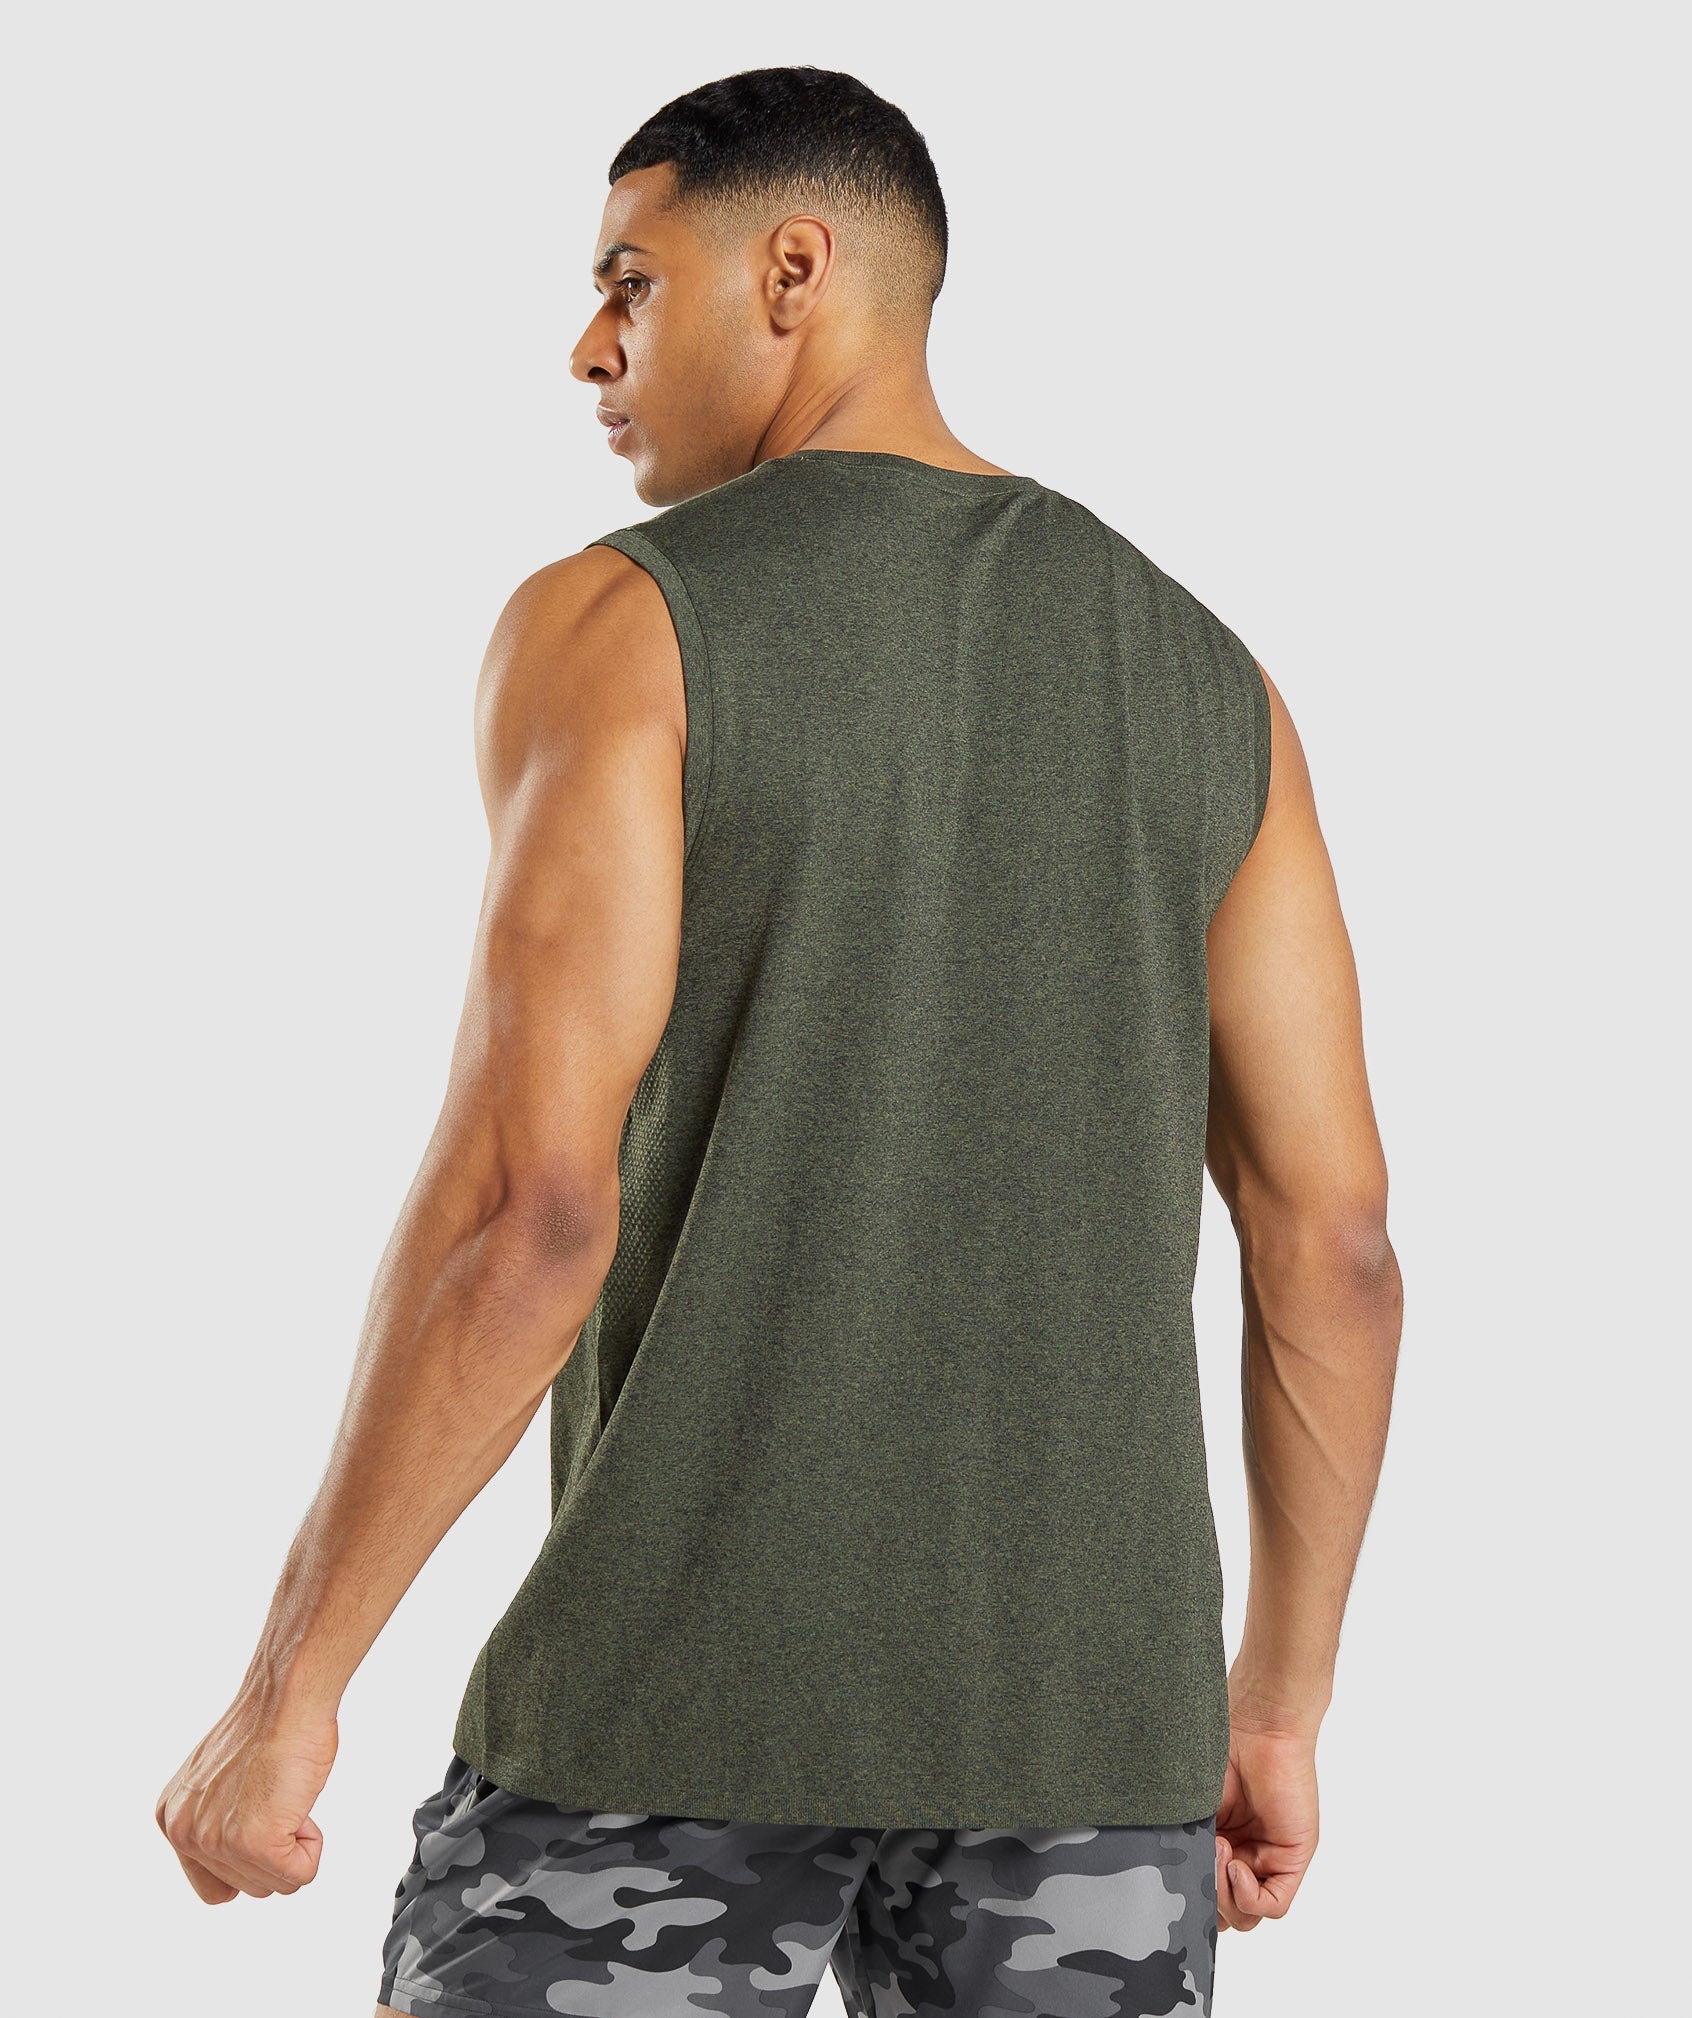 Arrival Seamless Tank in Core Olive Marl - view 2